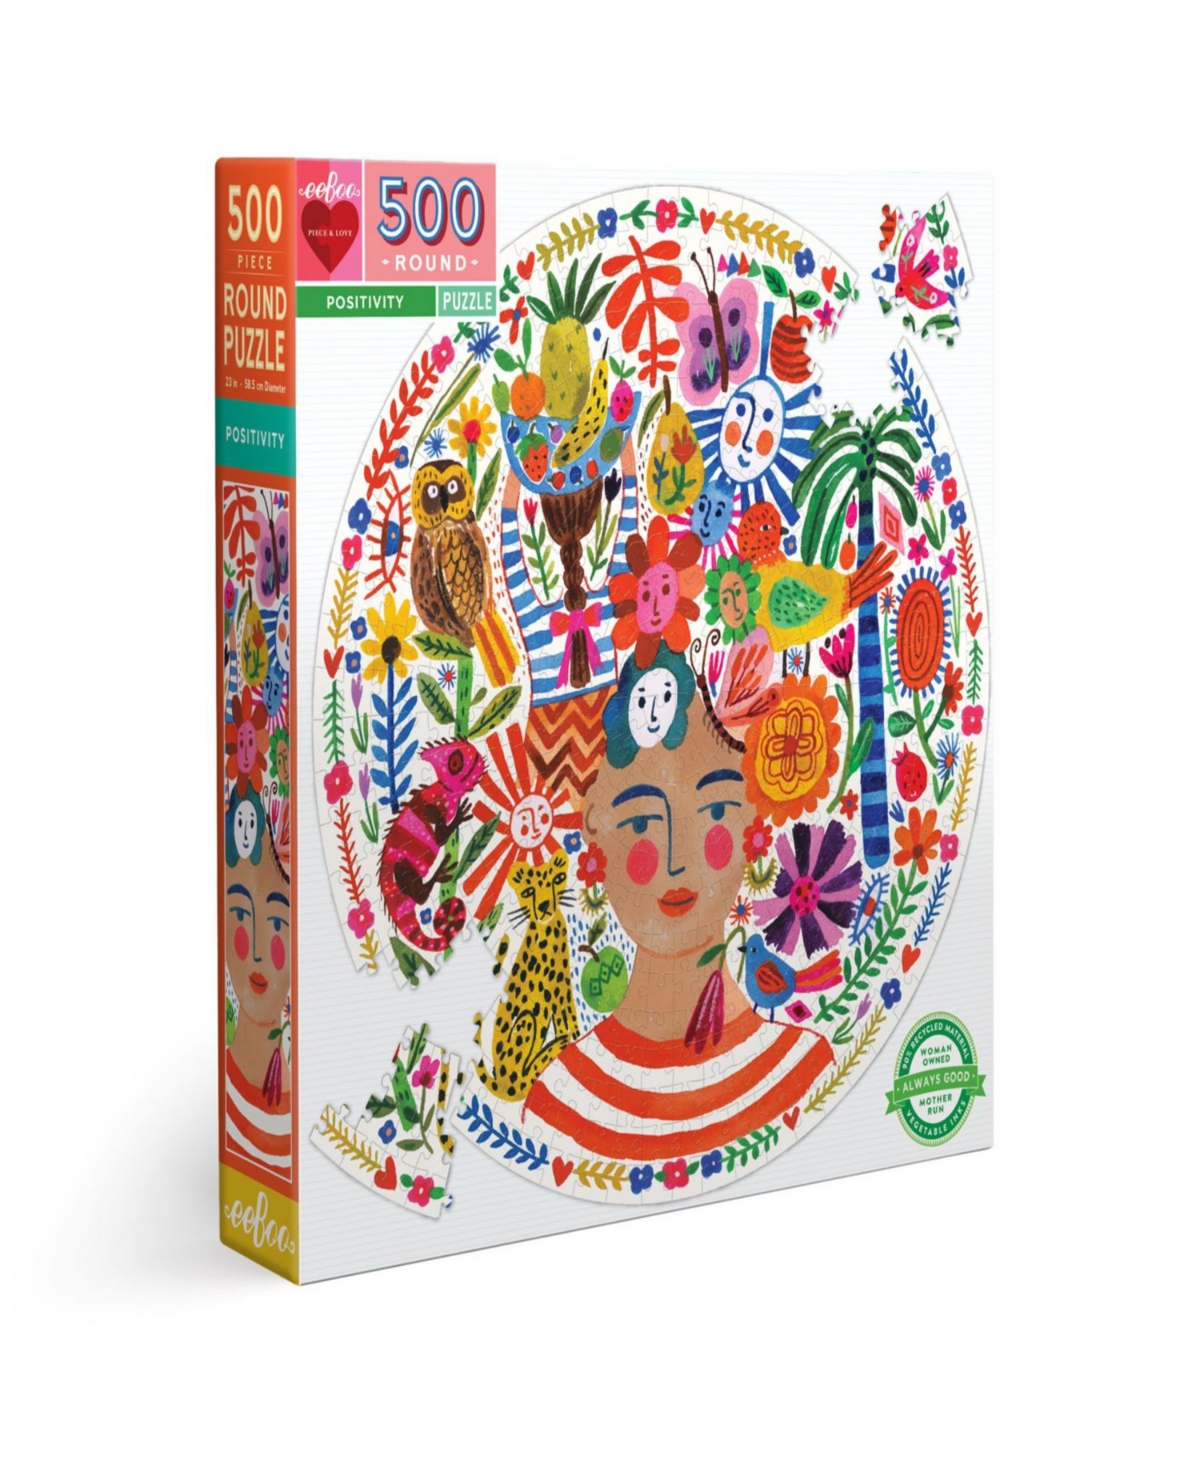 Eeboo Piece And Love Positivity 500 Piece Round Circle Jigsaw Puzzle In Multi